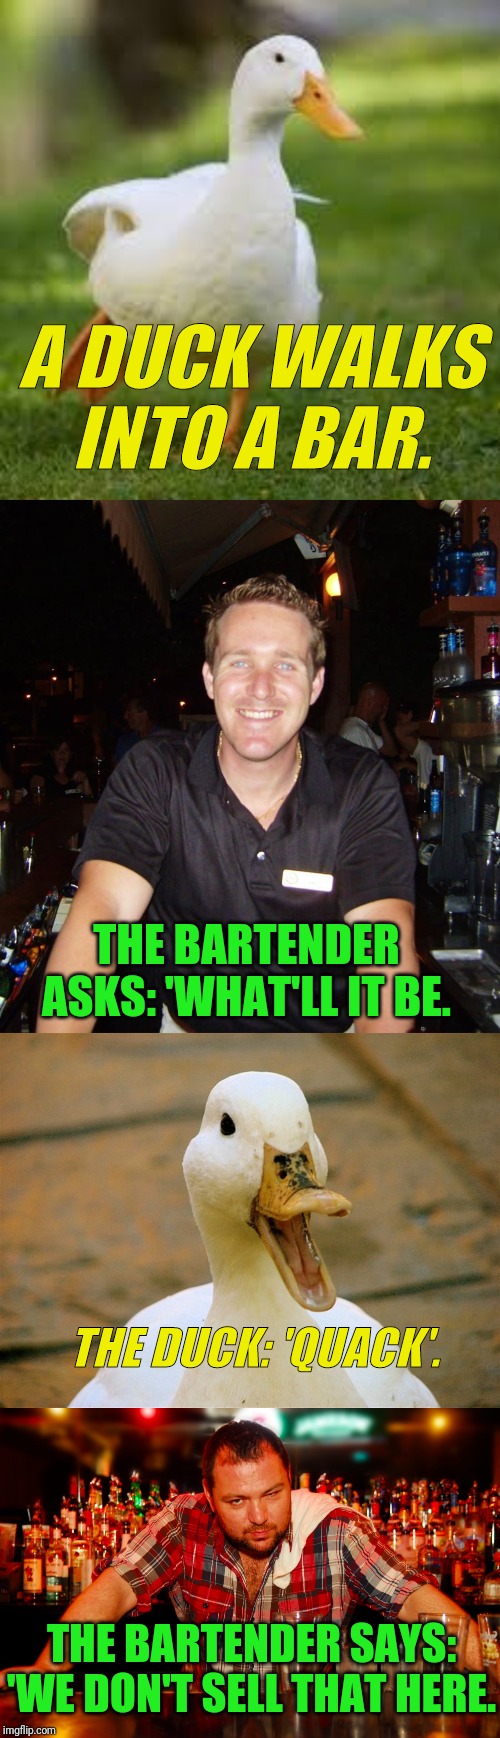 A Duck Walks Into A Bar | A DUCK WALKS INTO A BAR. THE BARTENDER ASKS: 'WHAT'LL IT BE. THE DUCK: 'QUACK'. THE BARTENDER SAYS: 'WE DON'T SELL THAT HERE. | image tagged in ducks be like,jason the bartender,annoyed bartender,duck,bar jokes | made w/ Imgflip meme maker